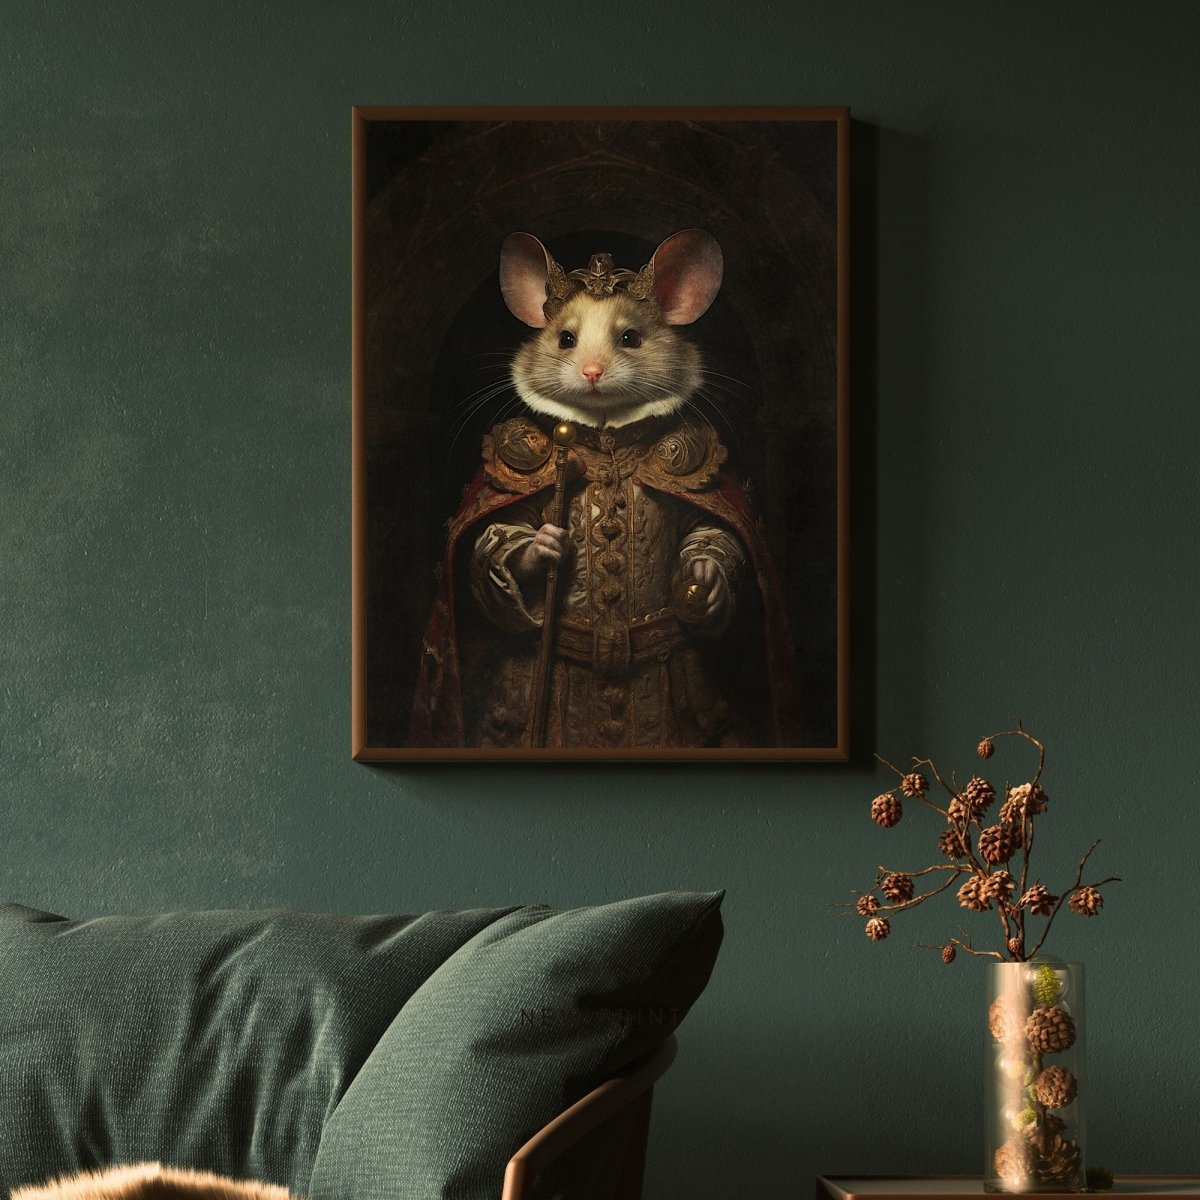 Royal Mouse Wall Art Renaissance Animal Portrait Painting Baroque Mouse Artwork Dark Academia Poster Animal Goat Goth Decor Paper Poster Print - Everything Pixel